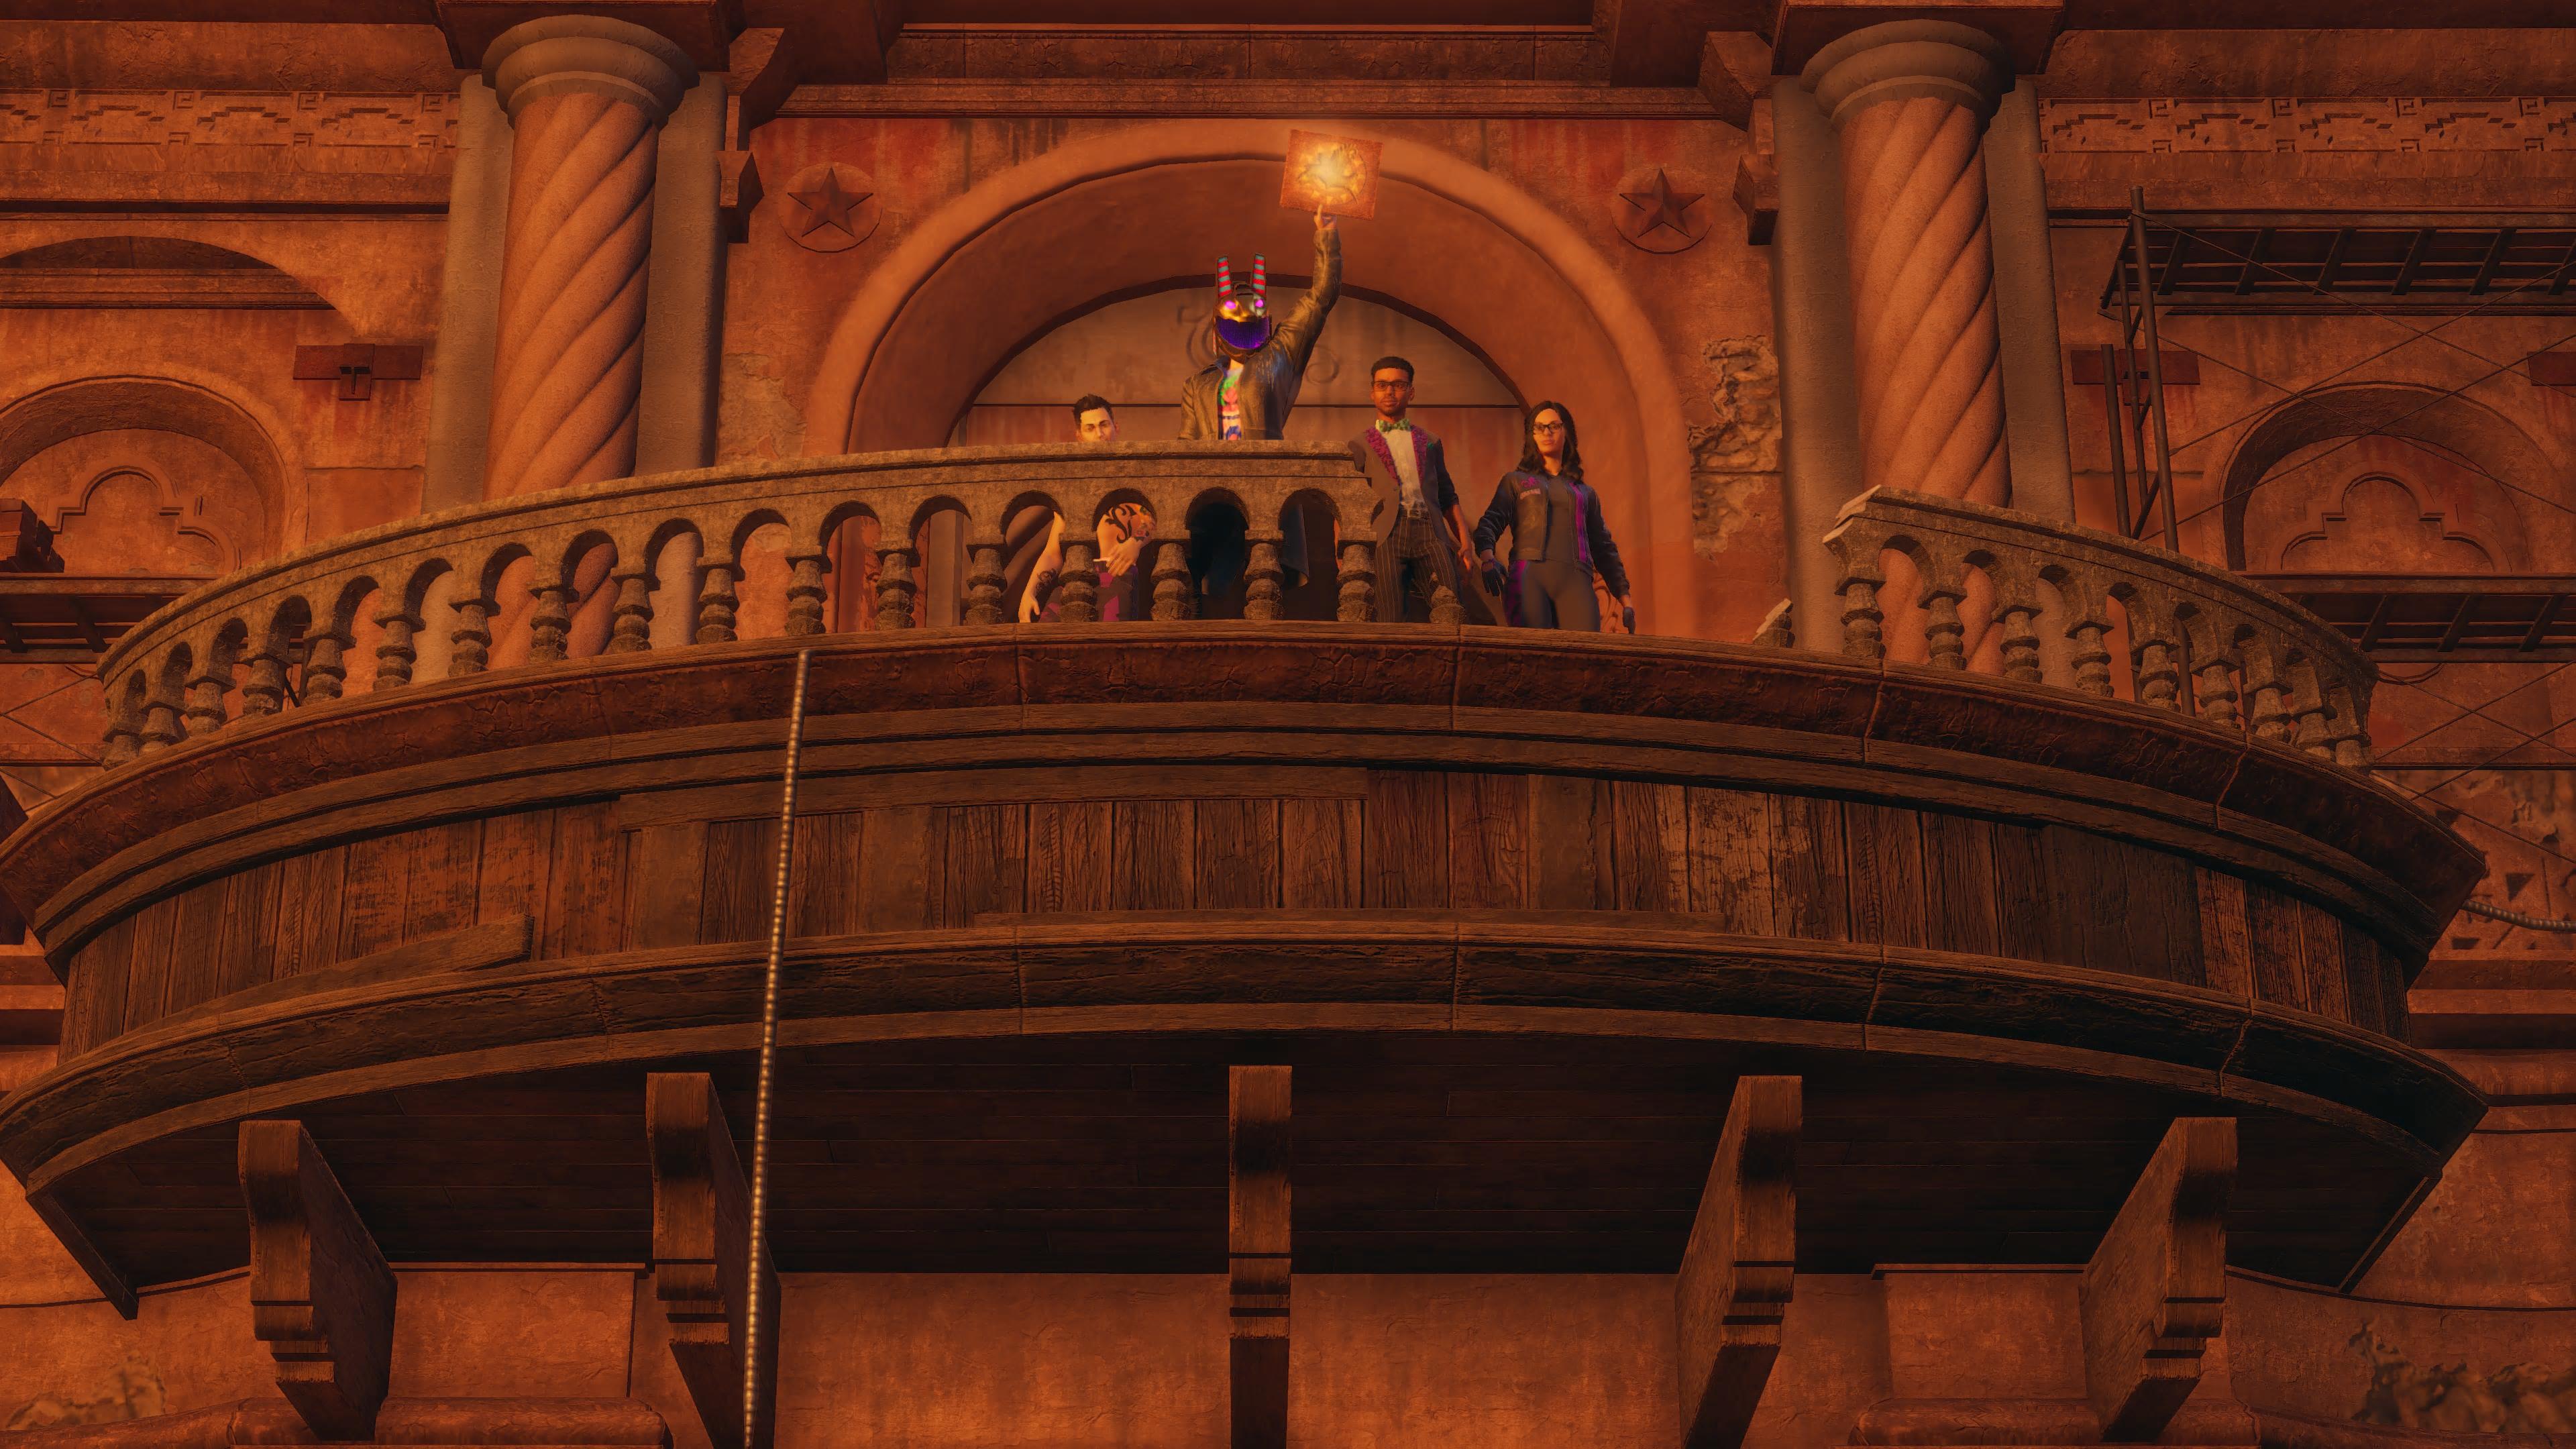 Saints Row review - a custscene still of a character on a balcony